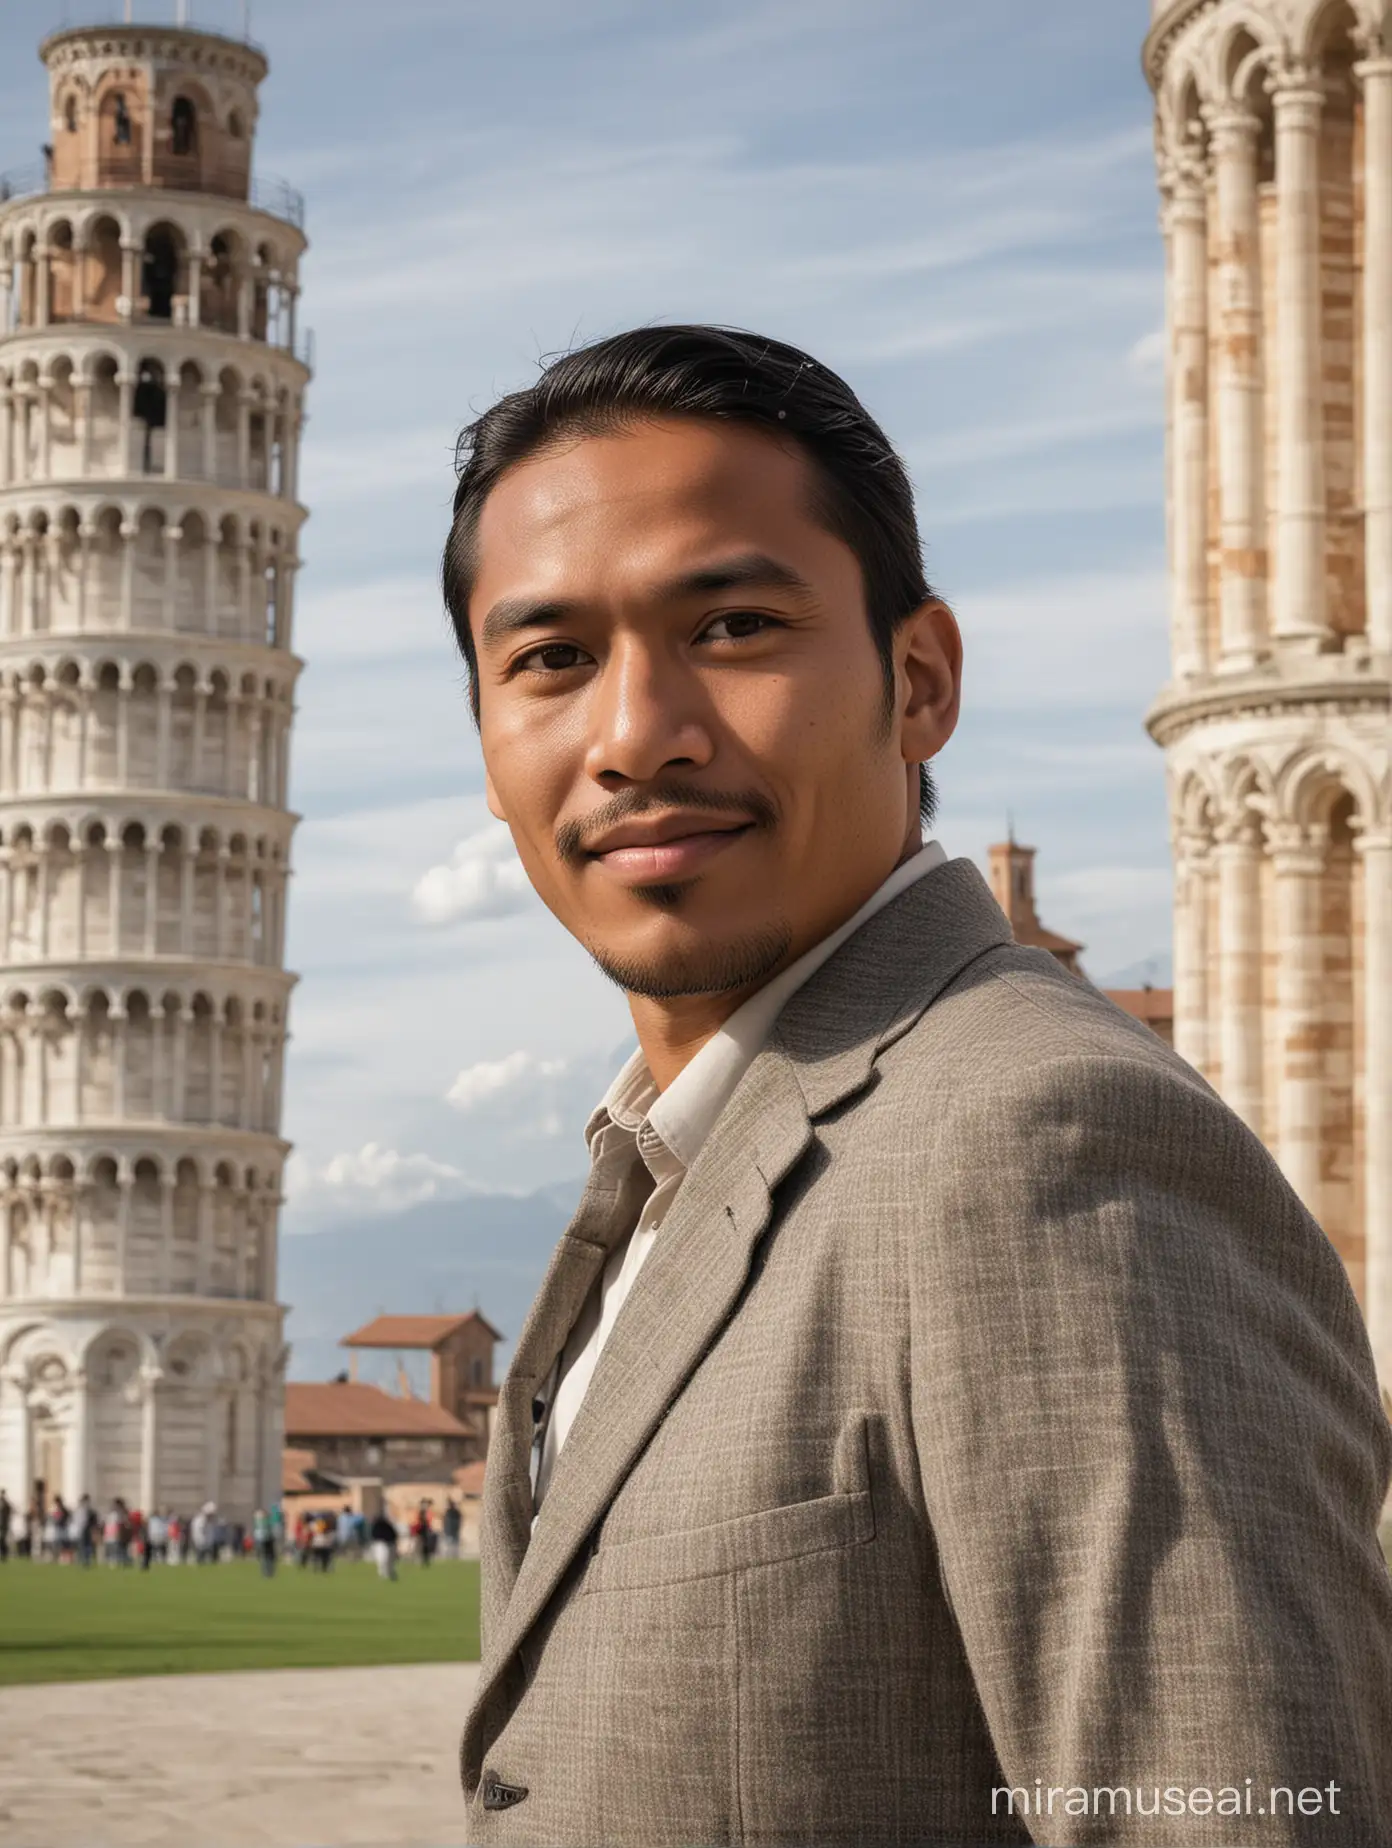 Indonesian Man Poses with Leaning Tower of Pisa in Background